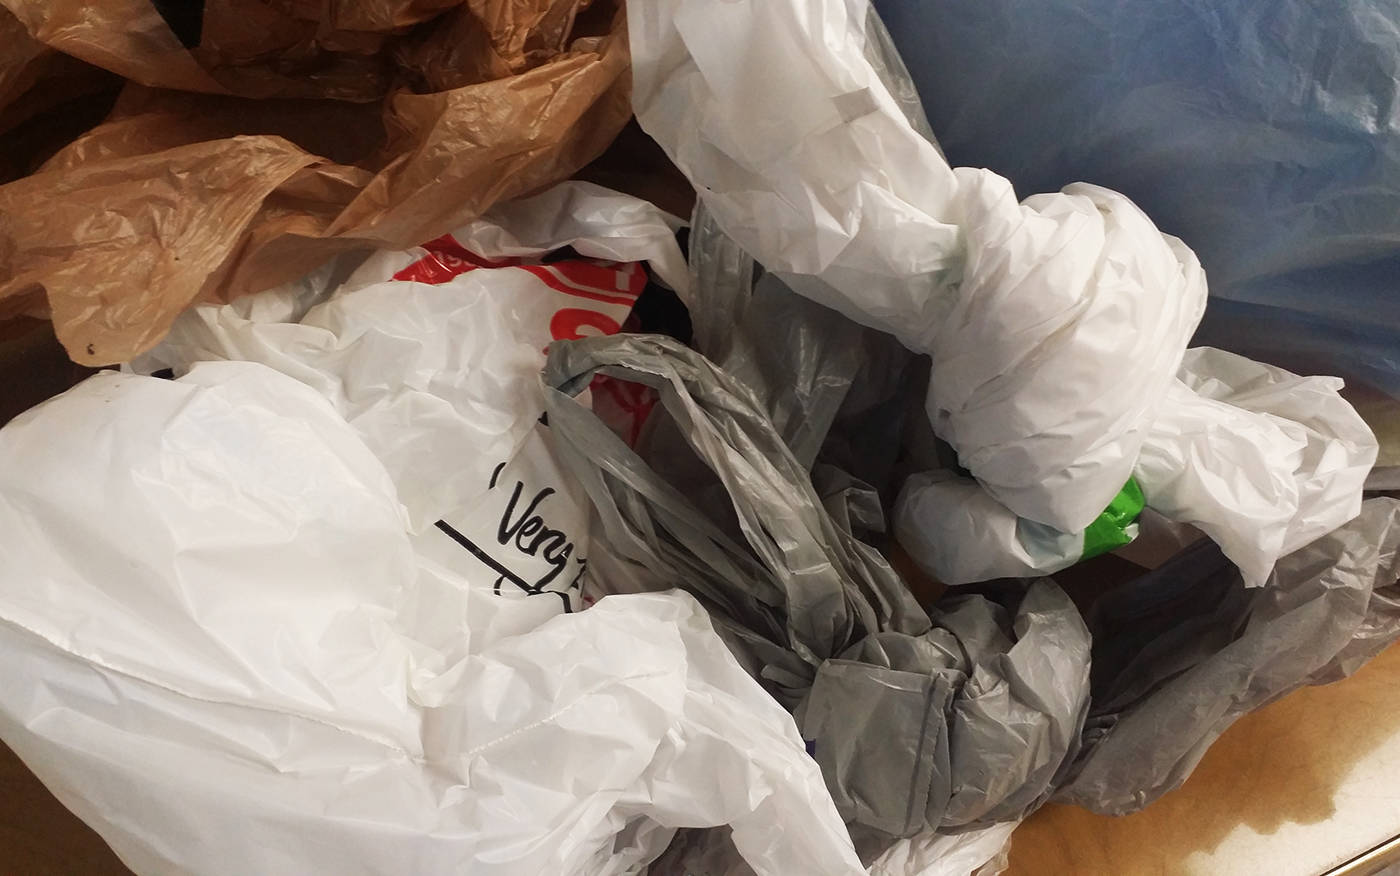 North Bend council approves ban on plastic bags at retail; promotes recycling